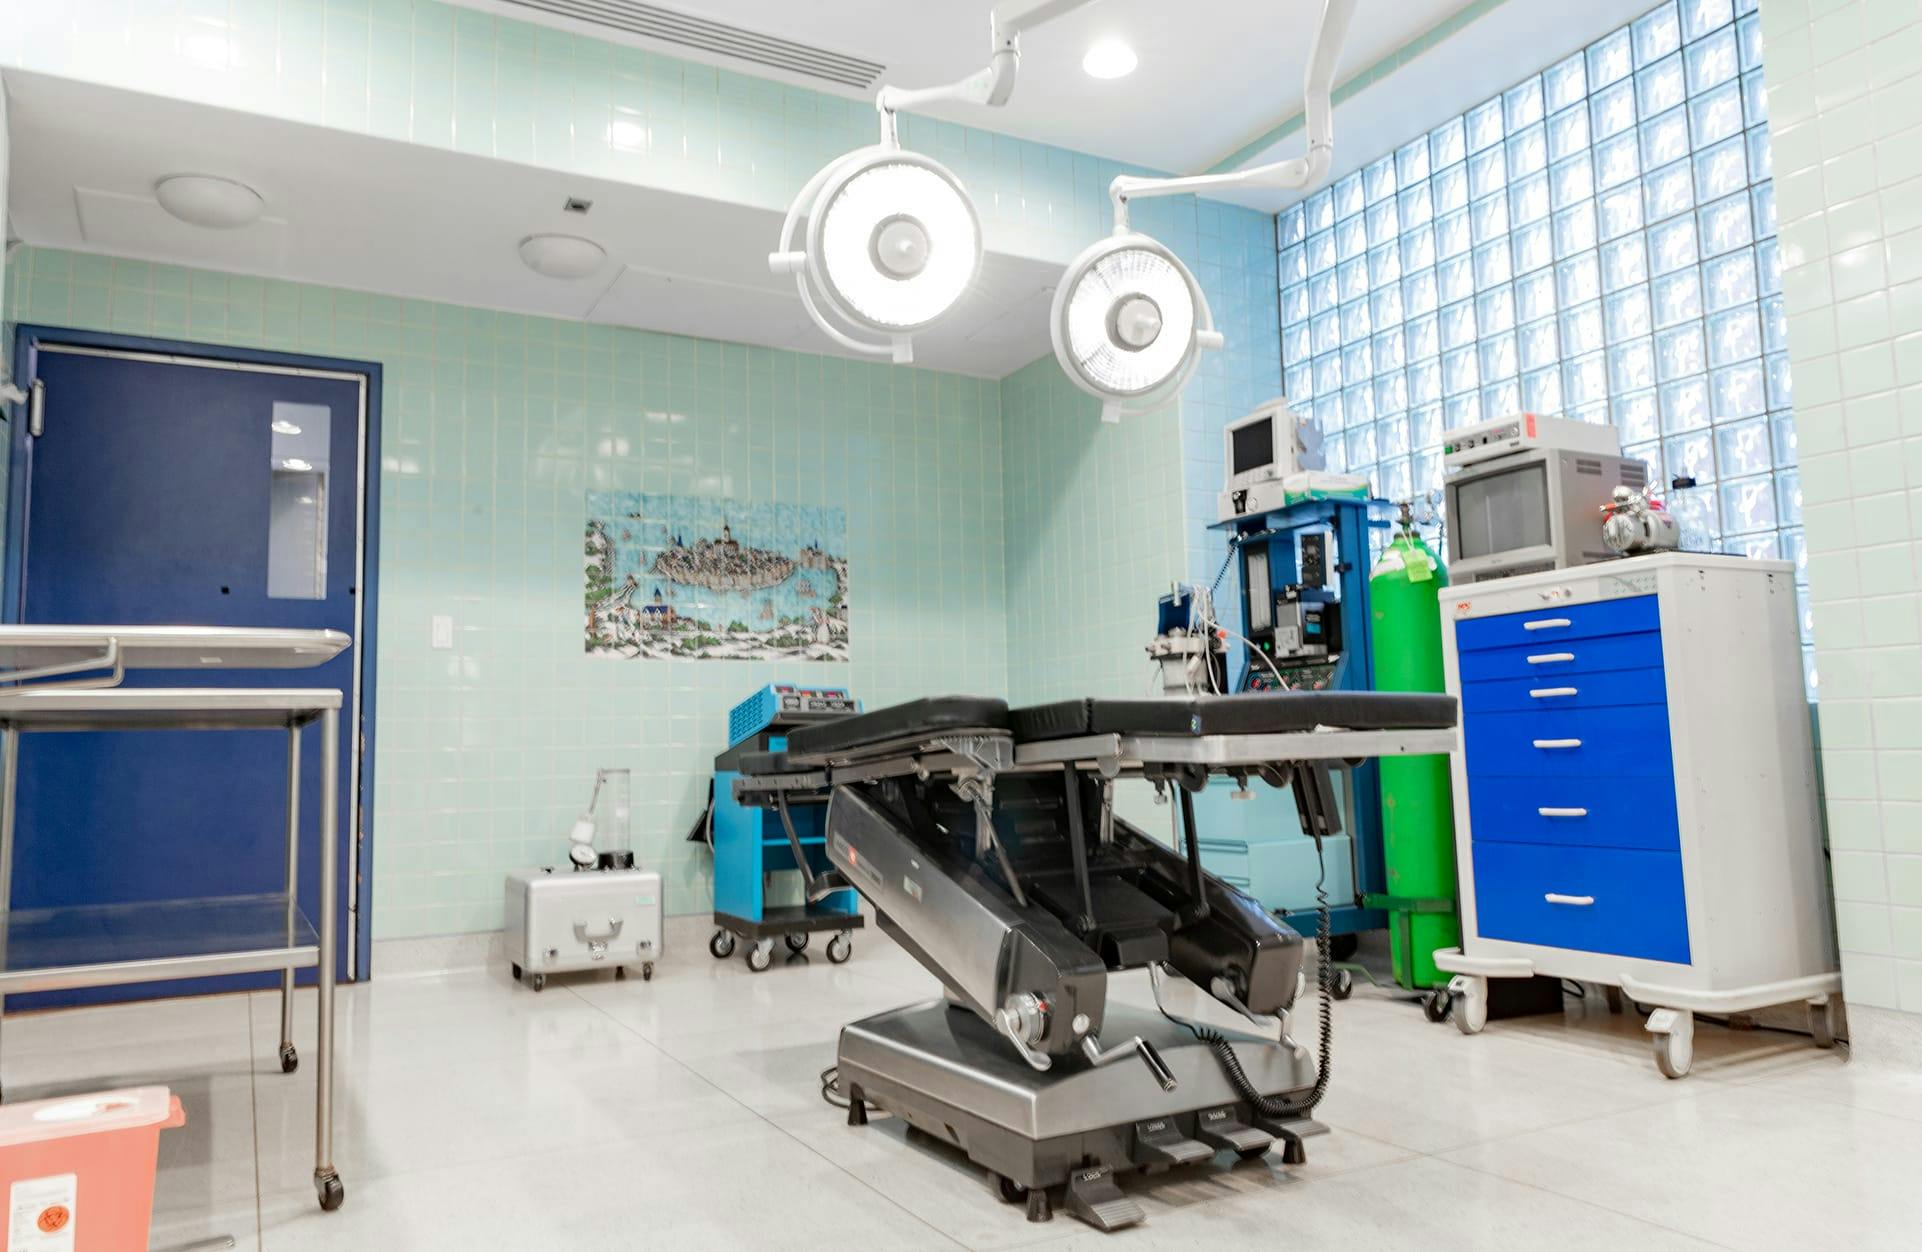 a look inside Dr. Bass' operating room